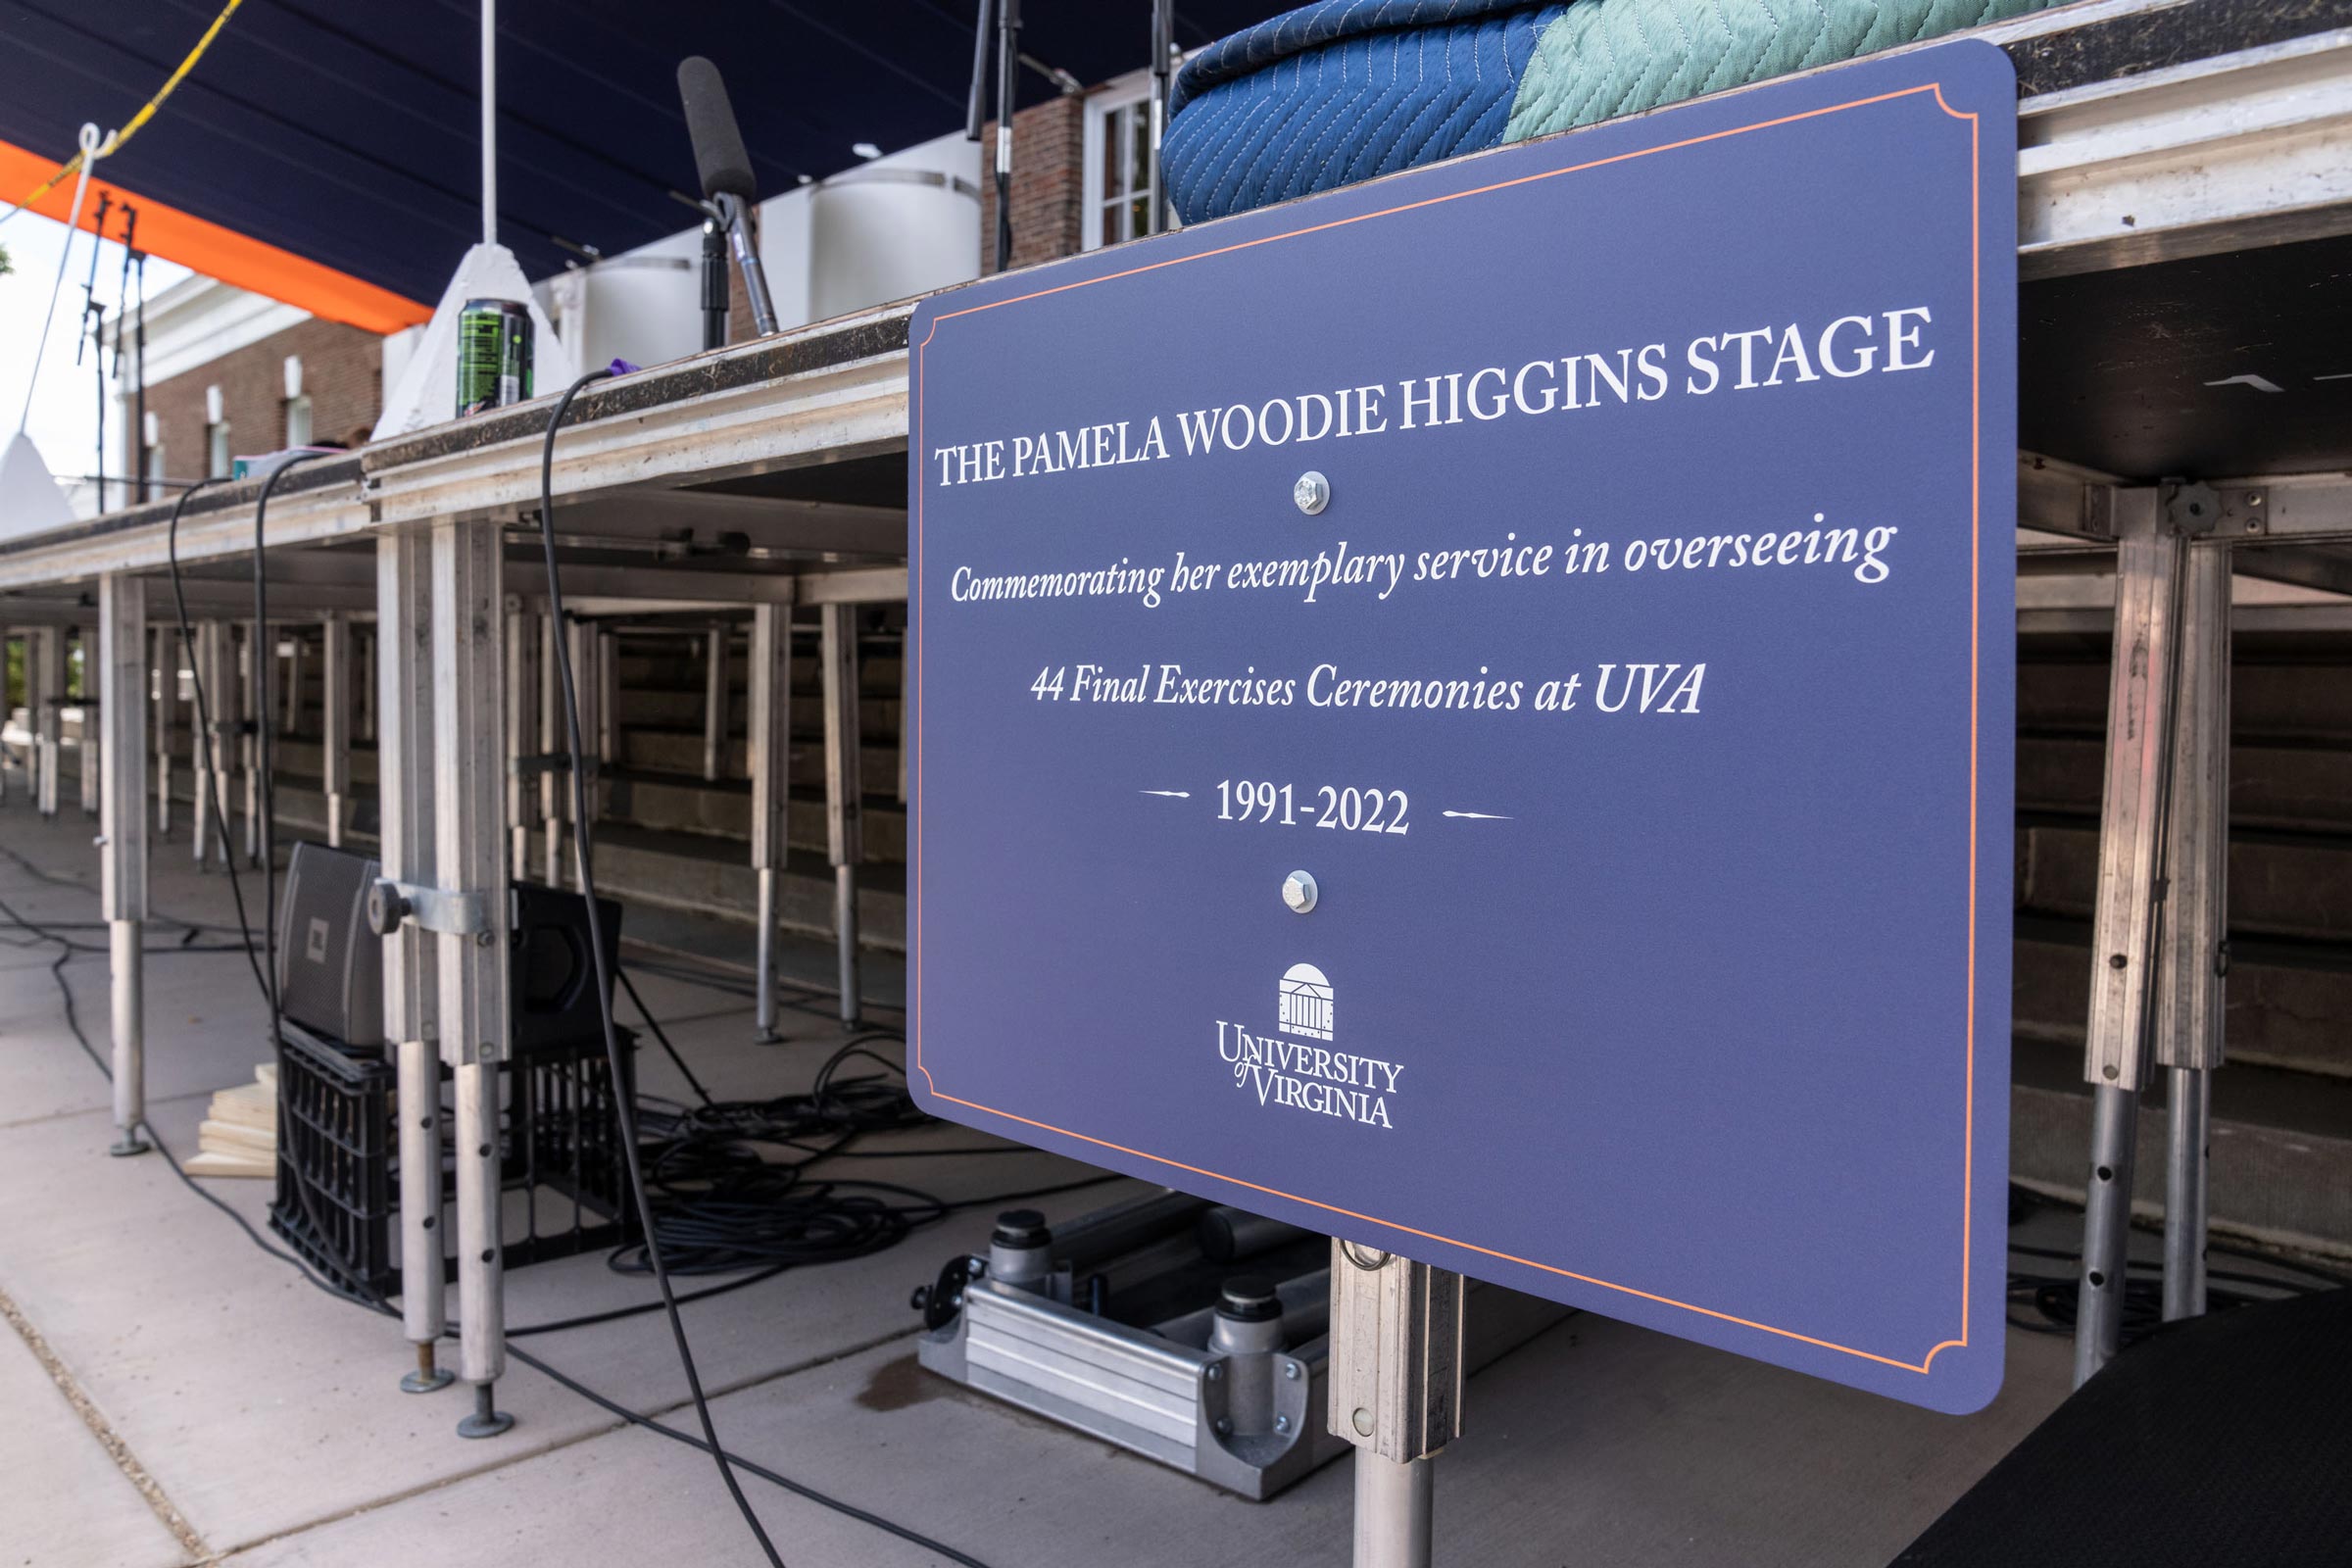 A sign on a stage reads 'The Pamela Woodie Higgins Stage. Commemorating her exemplary service in overseeing 44 Final Exercises Ceremonies at UVA 1991-2022.'